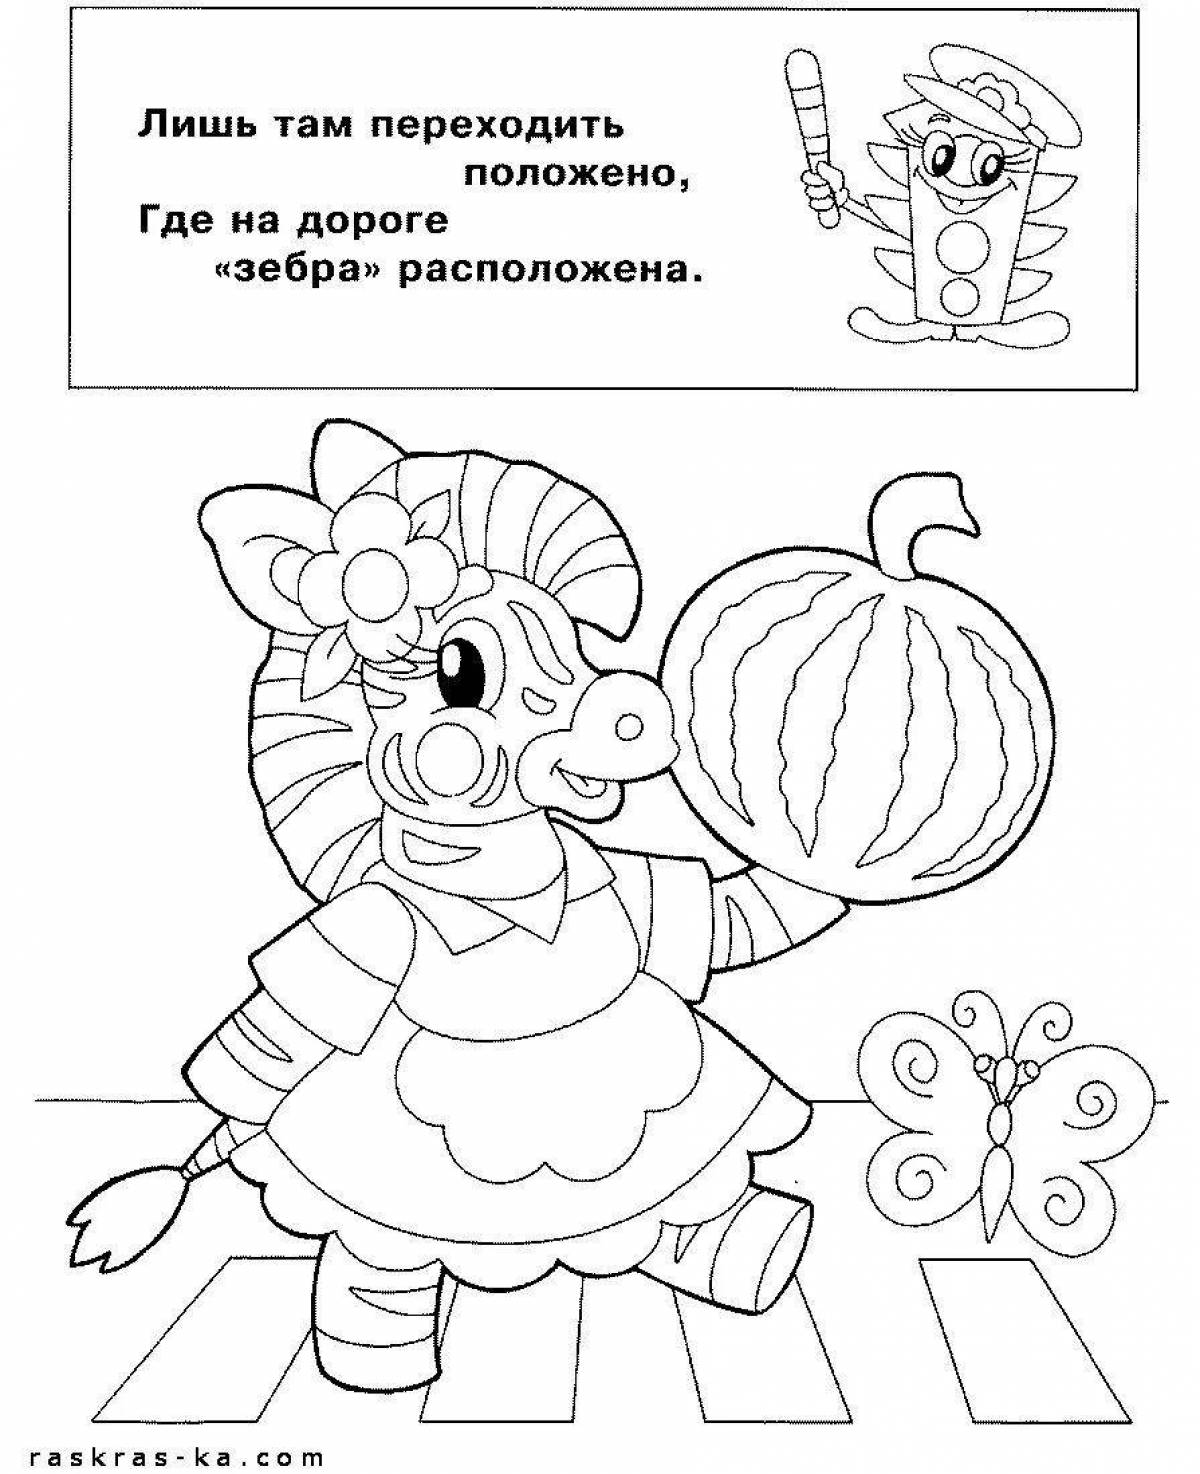 Color-explosive coloring page for kids pdd